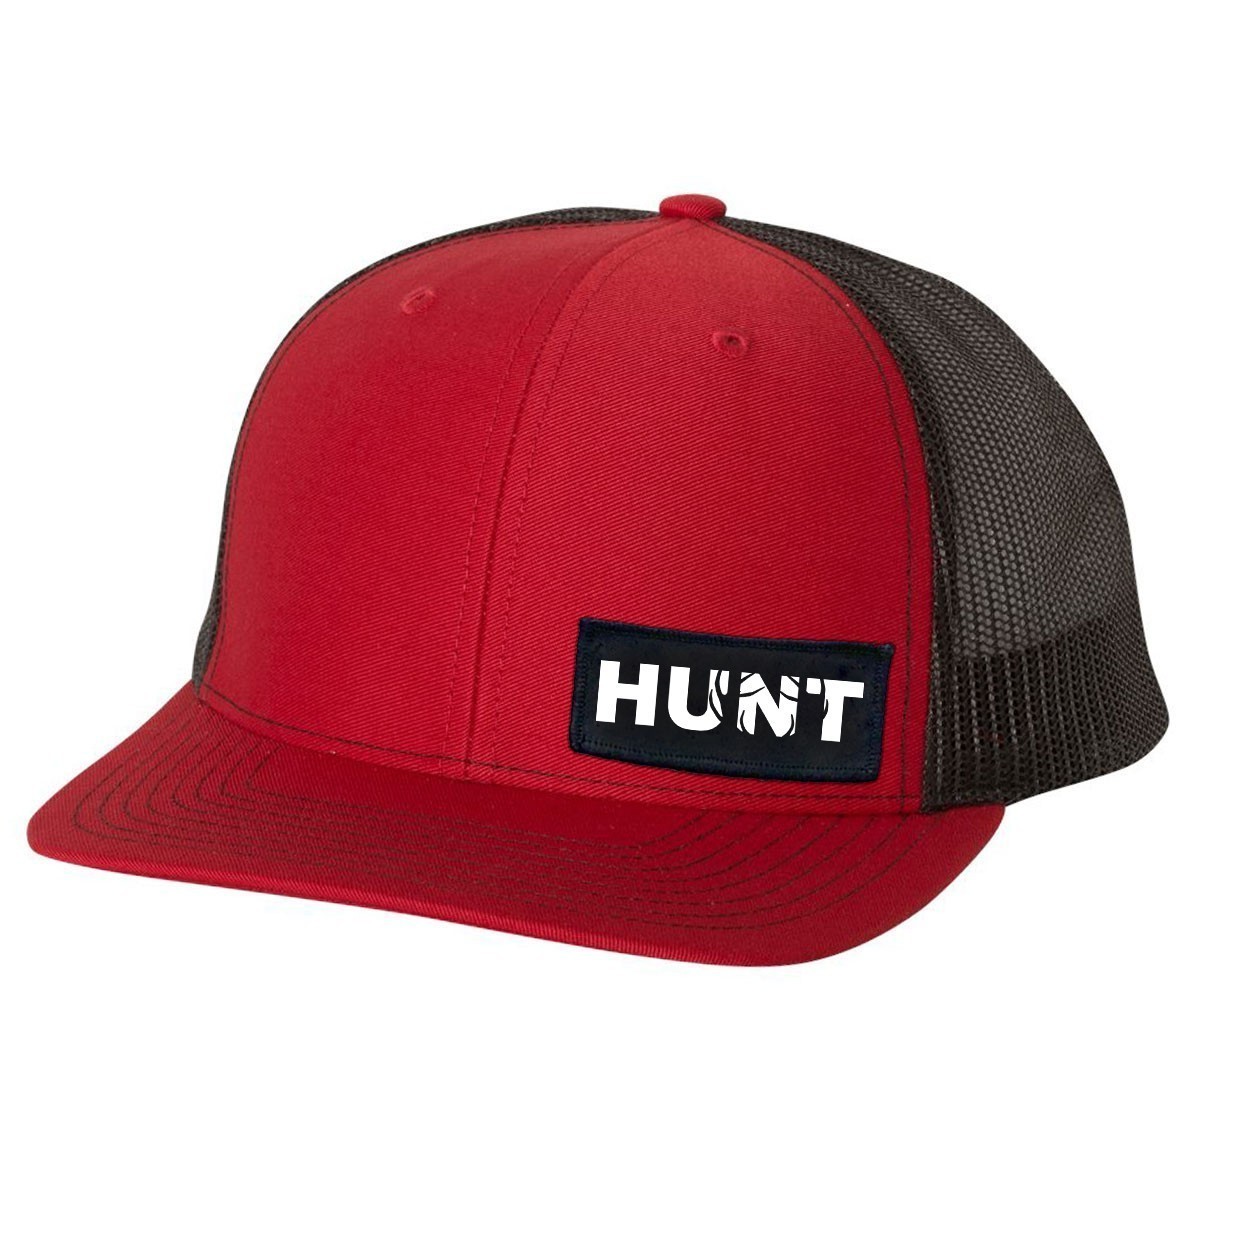 Hunt Rack Logo Night Out Woven Patch Snapback Trucker Hat Red/Black (White Logo)